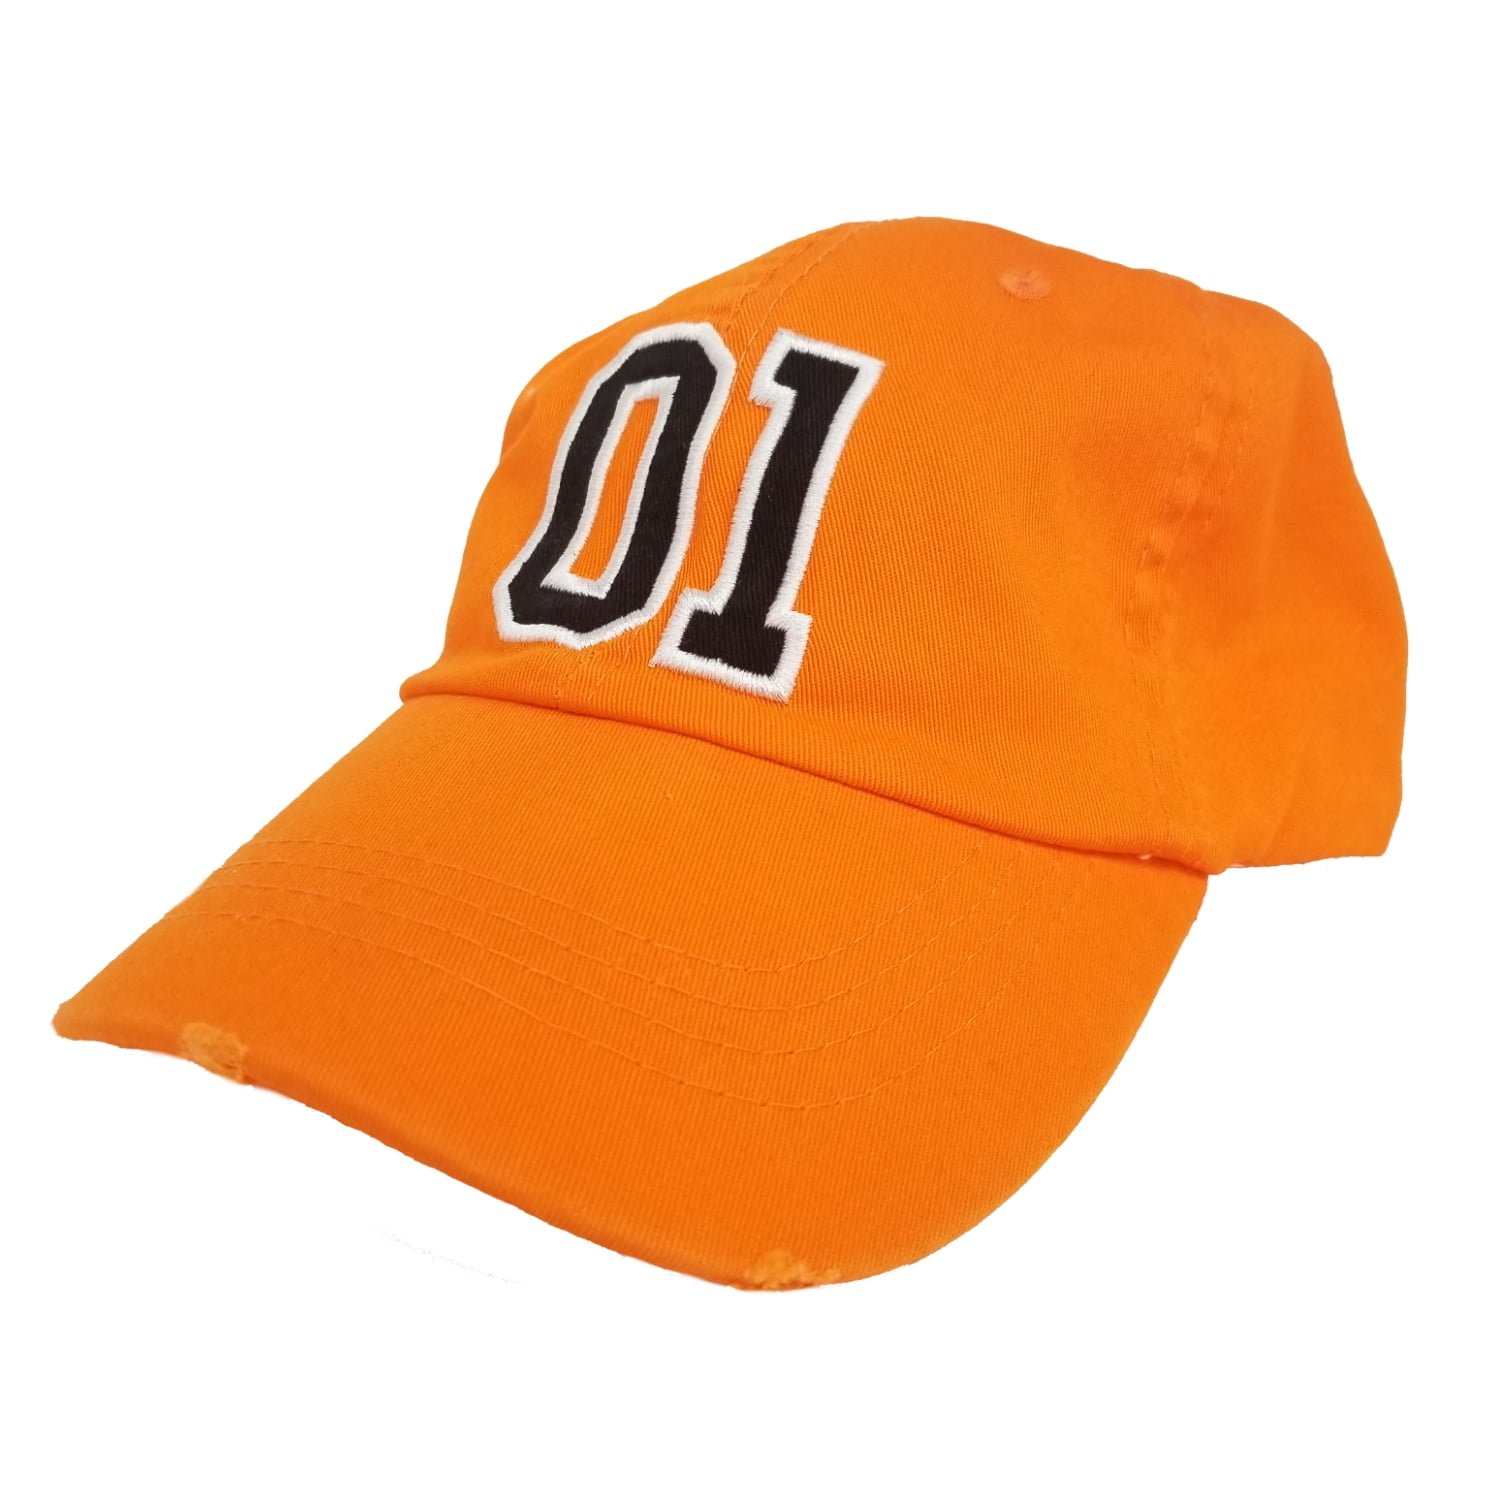 New General Lee 01 Orange Embroidered Cotton Twill Cap Hat Dukes of Hazzard 